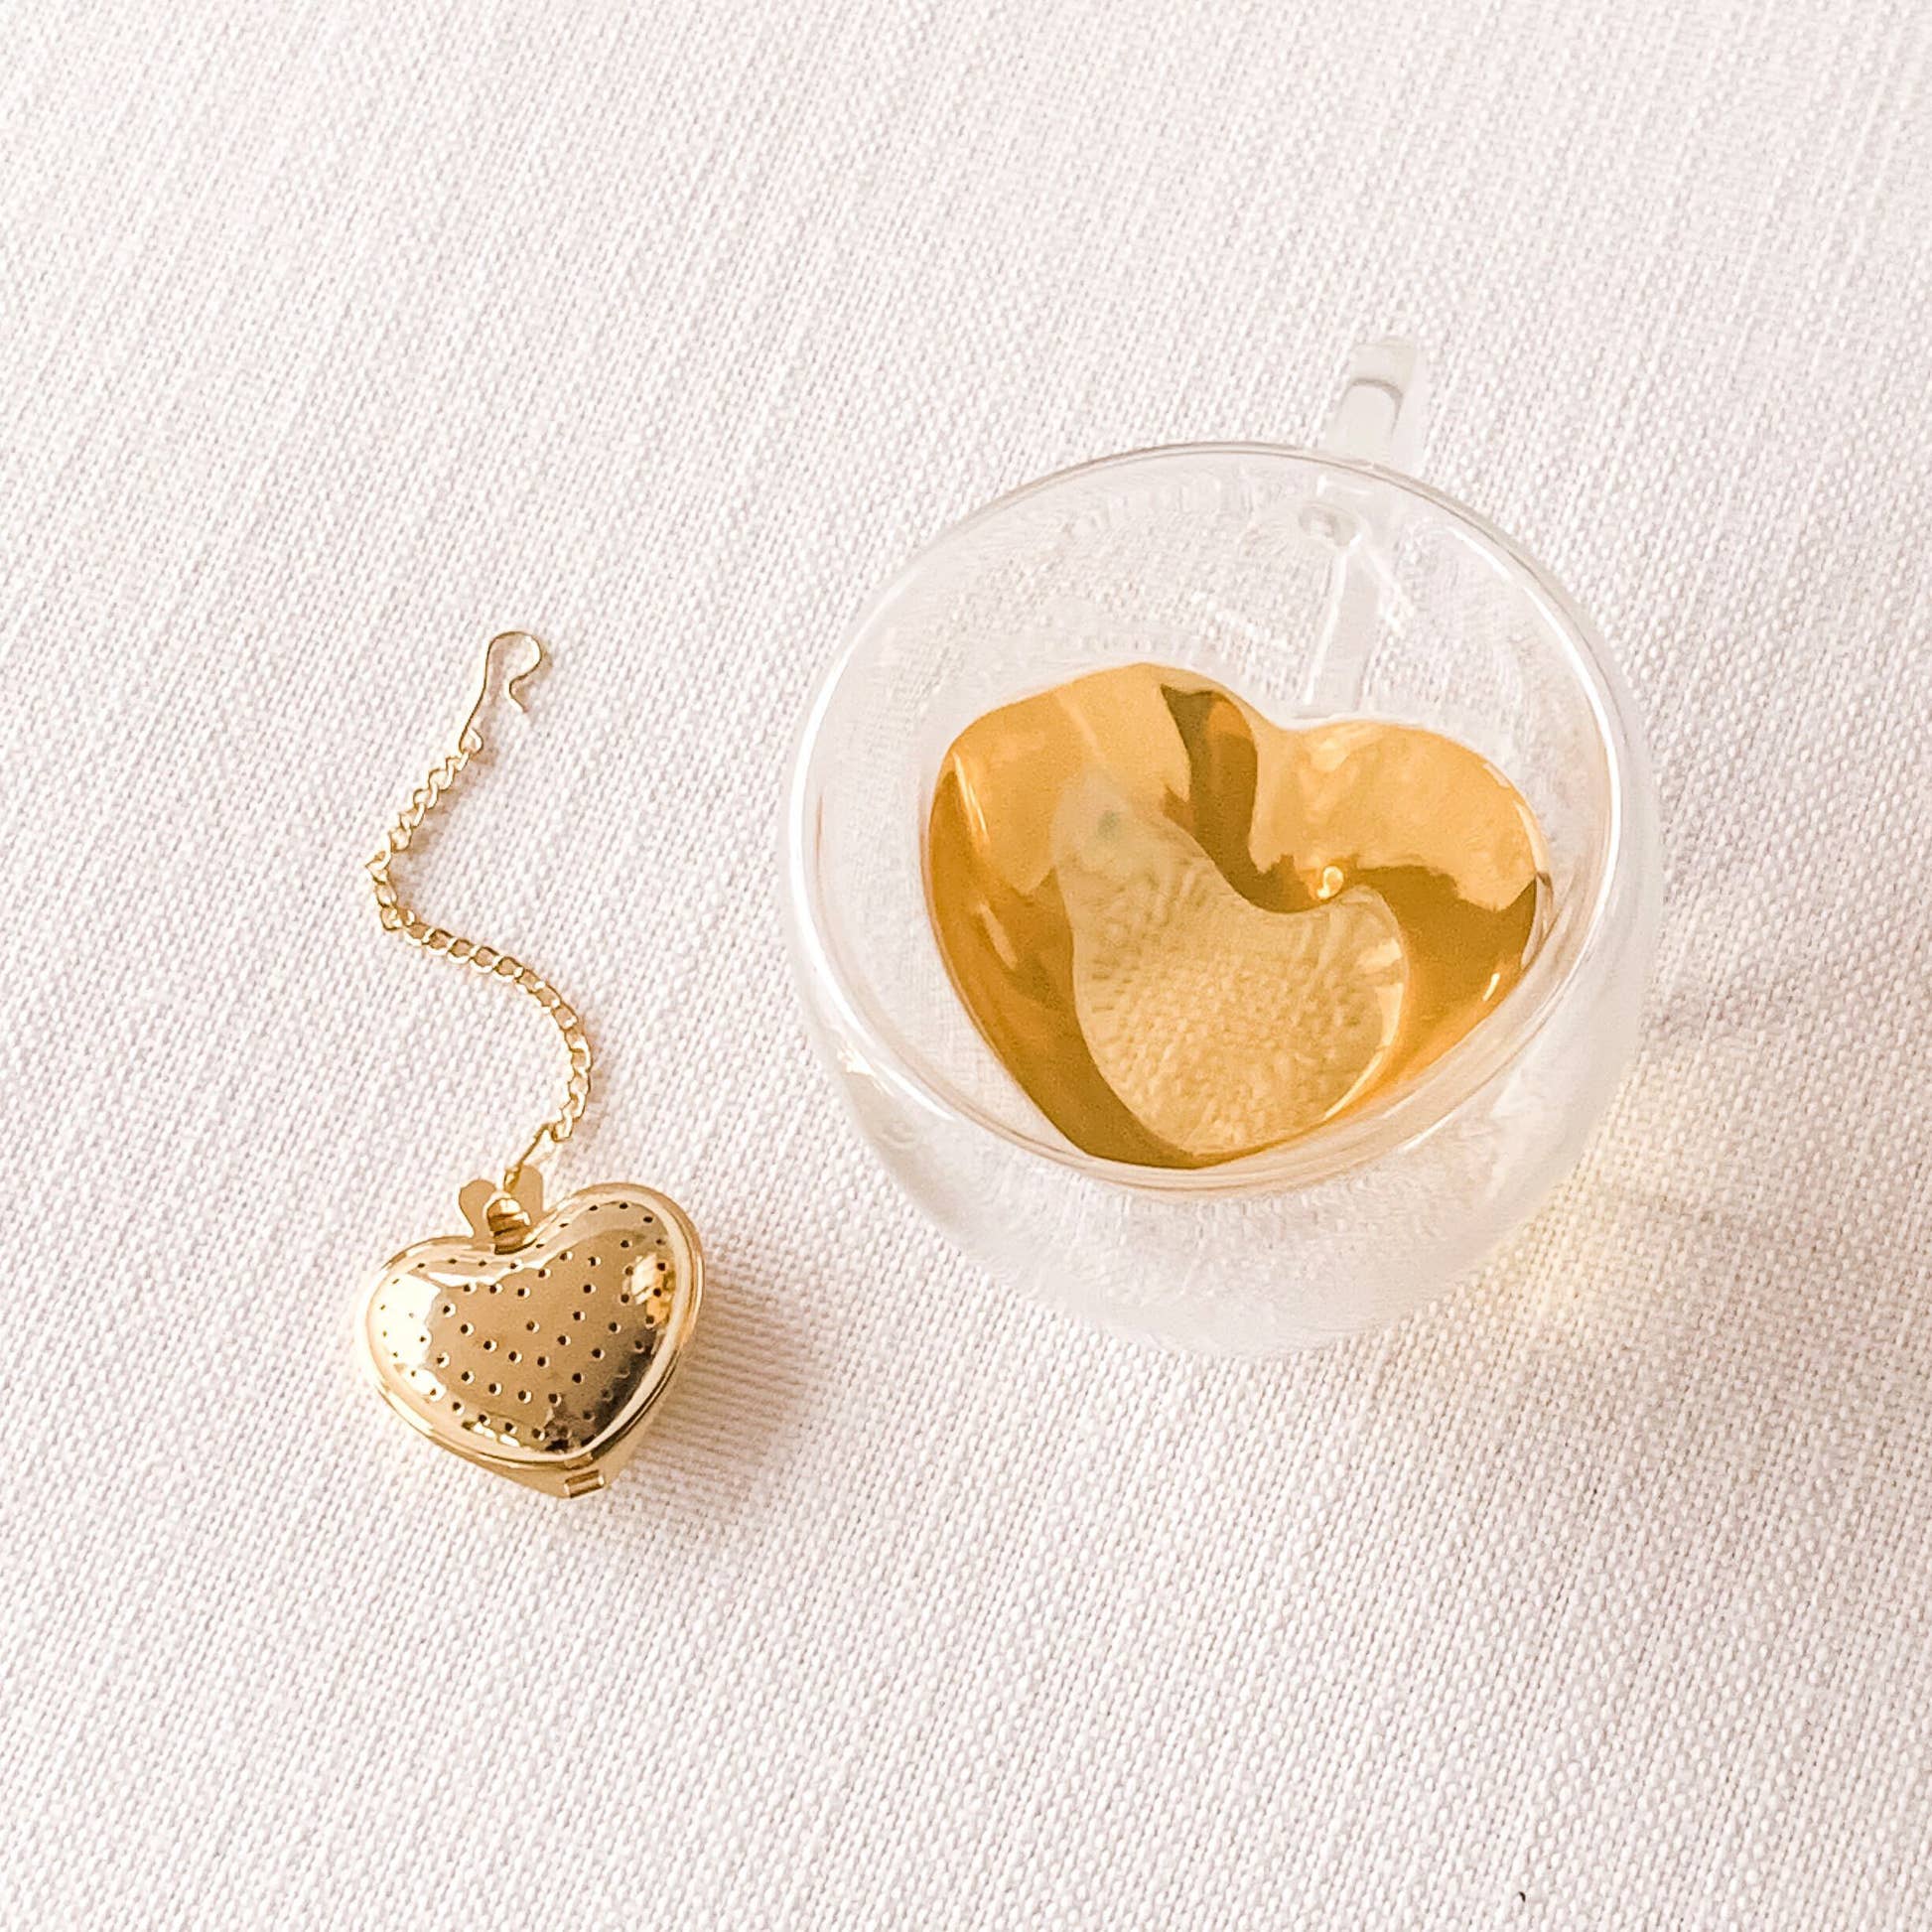 Sips by double-walled glass heart mug with tea and gold heart infuser